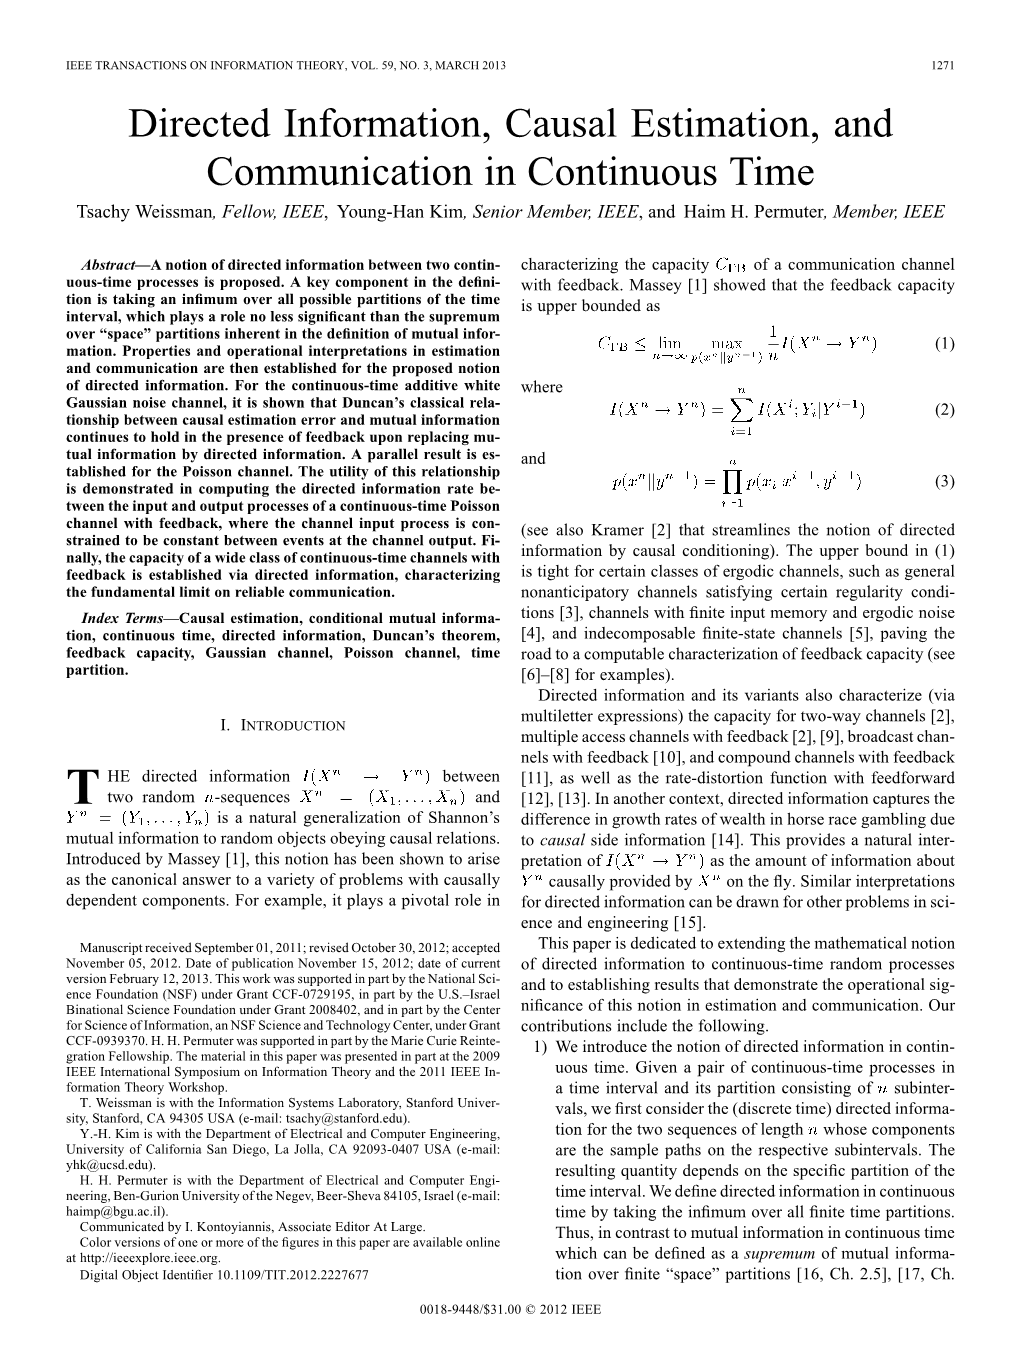 Directed Information, Causal Estimation, and Communication in Continuous Time Tsachy Weissman, Fellow, IEEE, Young-Han Kim, Senior Member, IEEE,Andhaimh